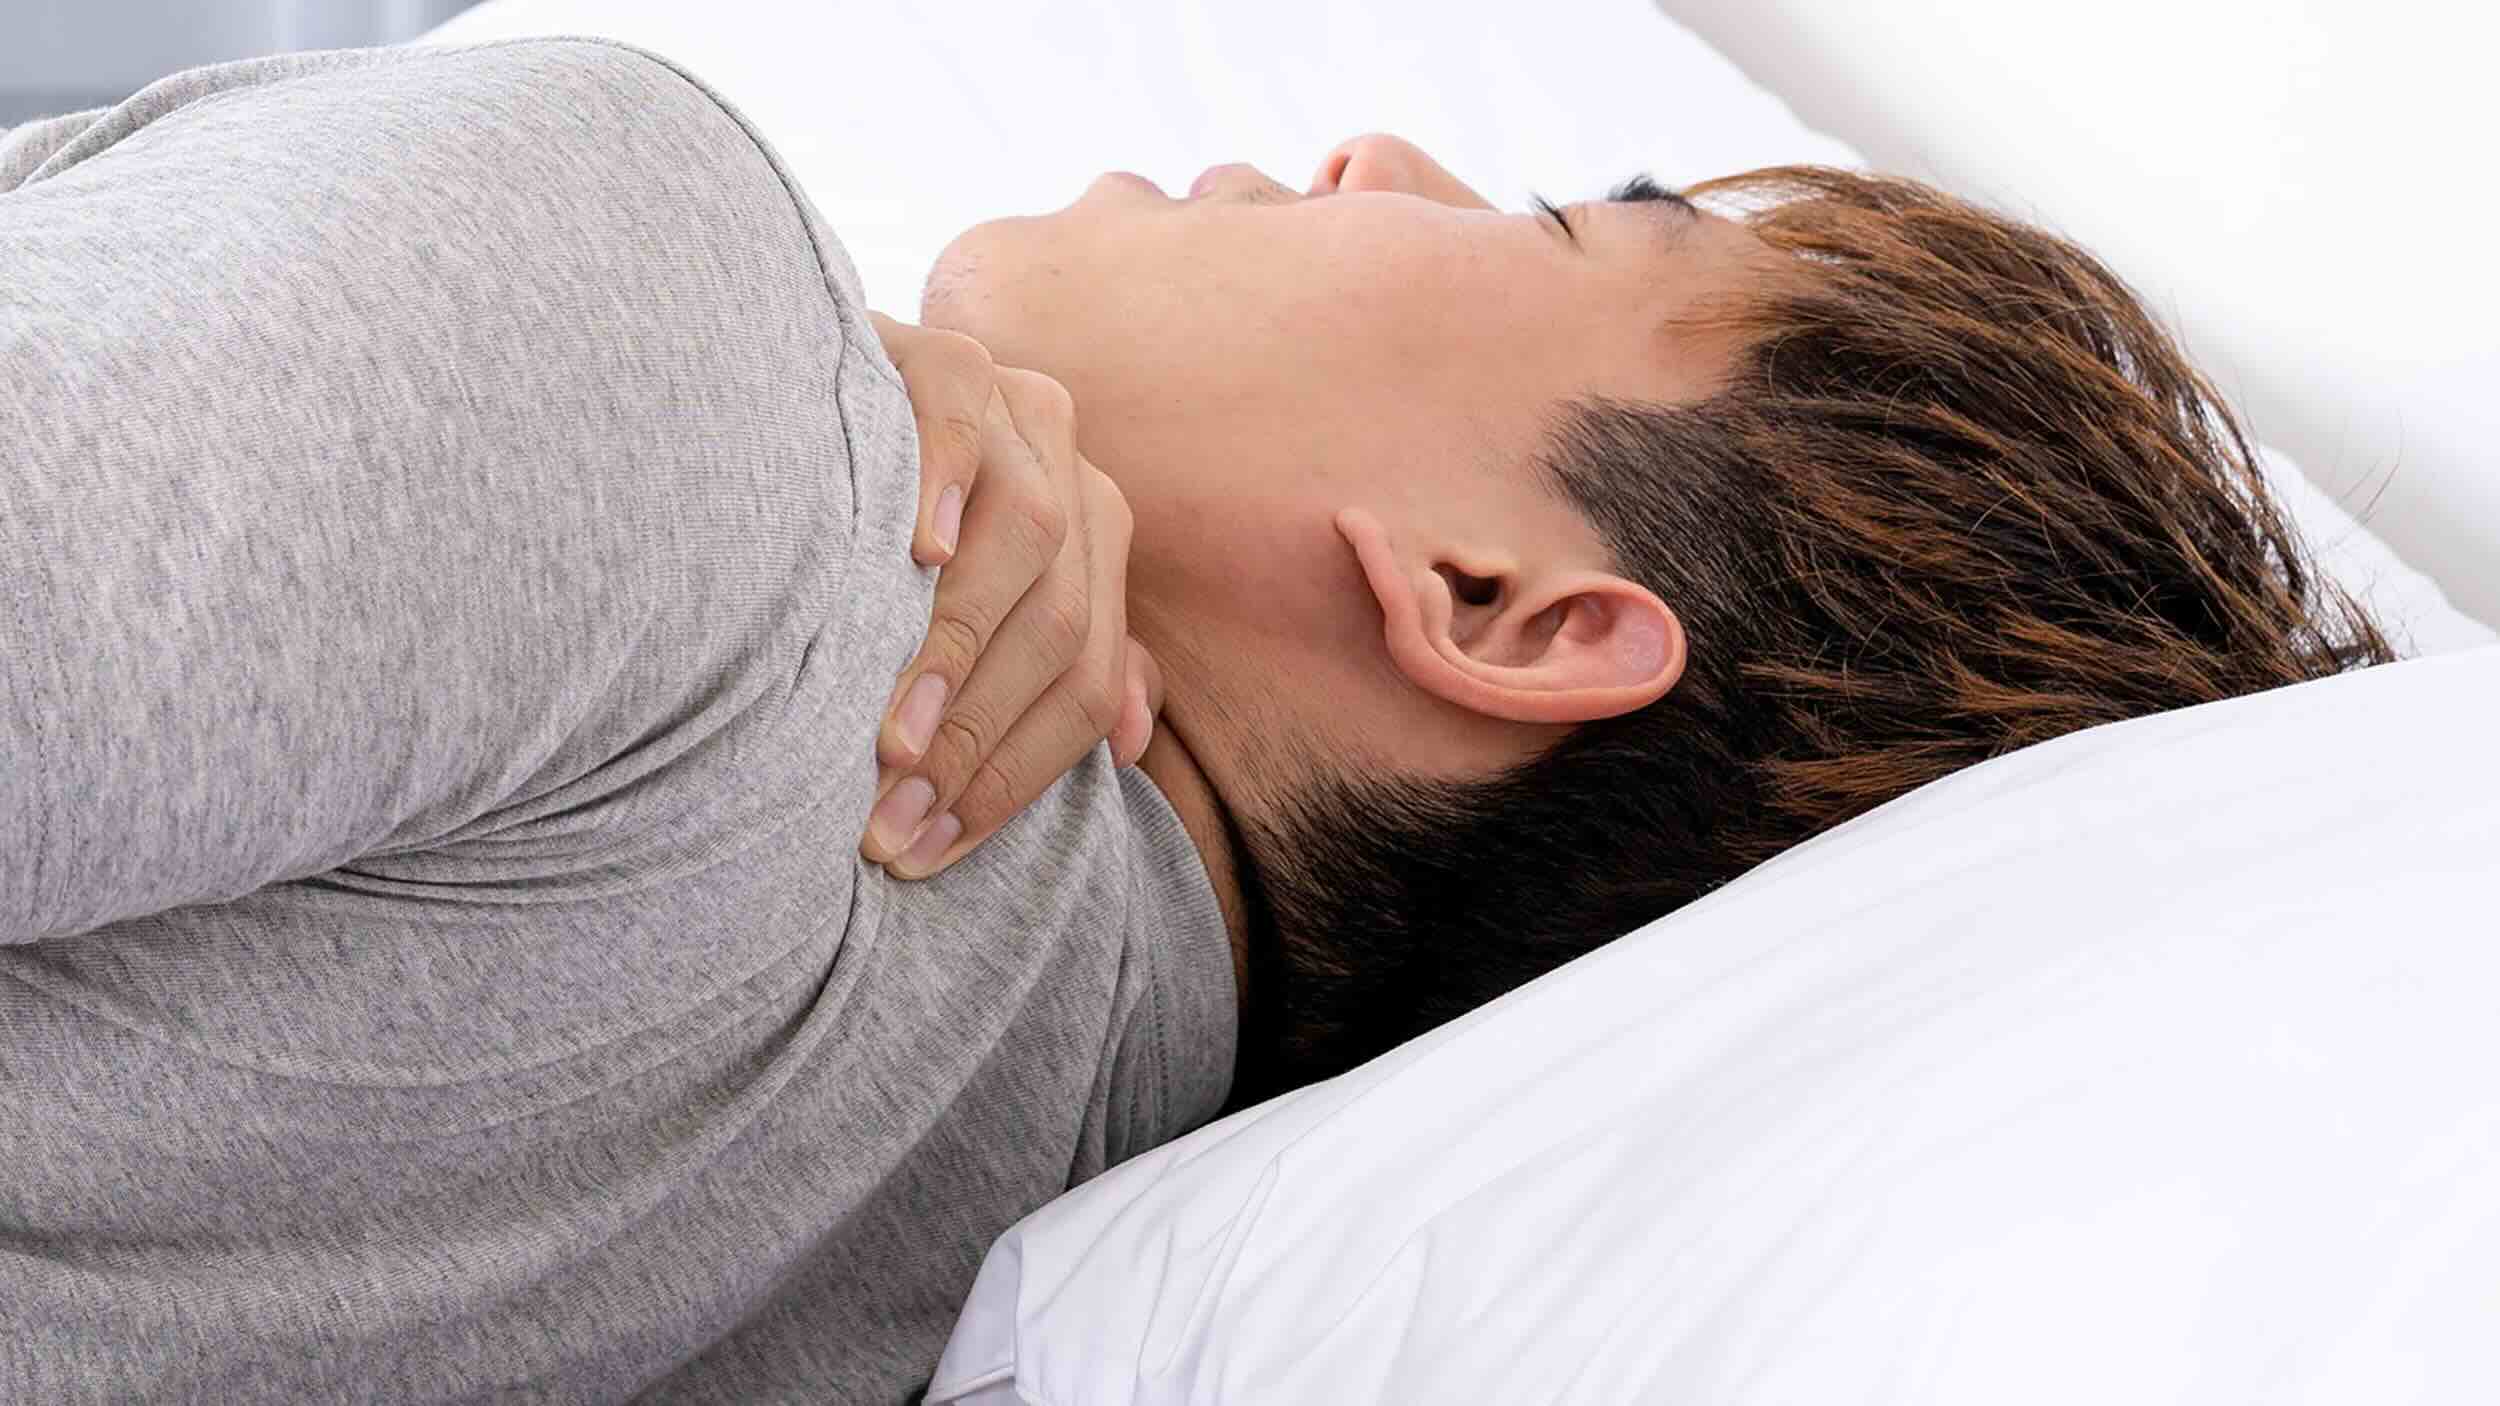 How Many Pillows Should You Sleep With Neck Pain